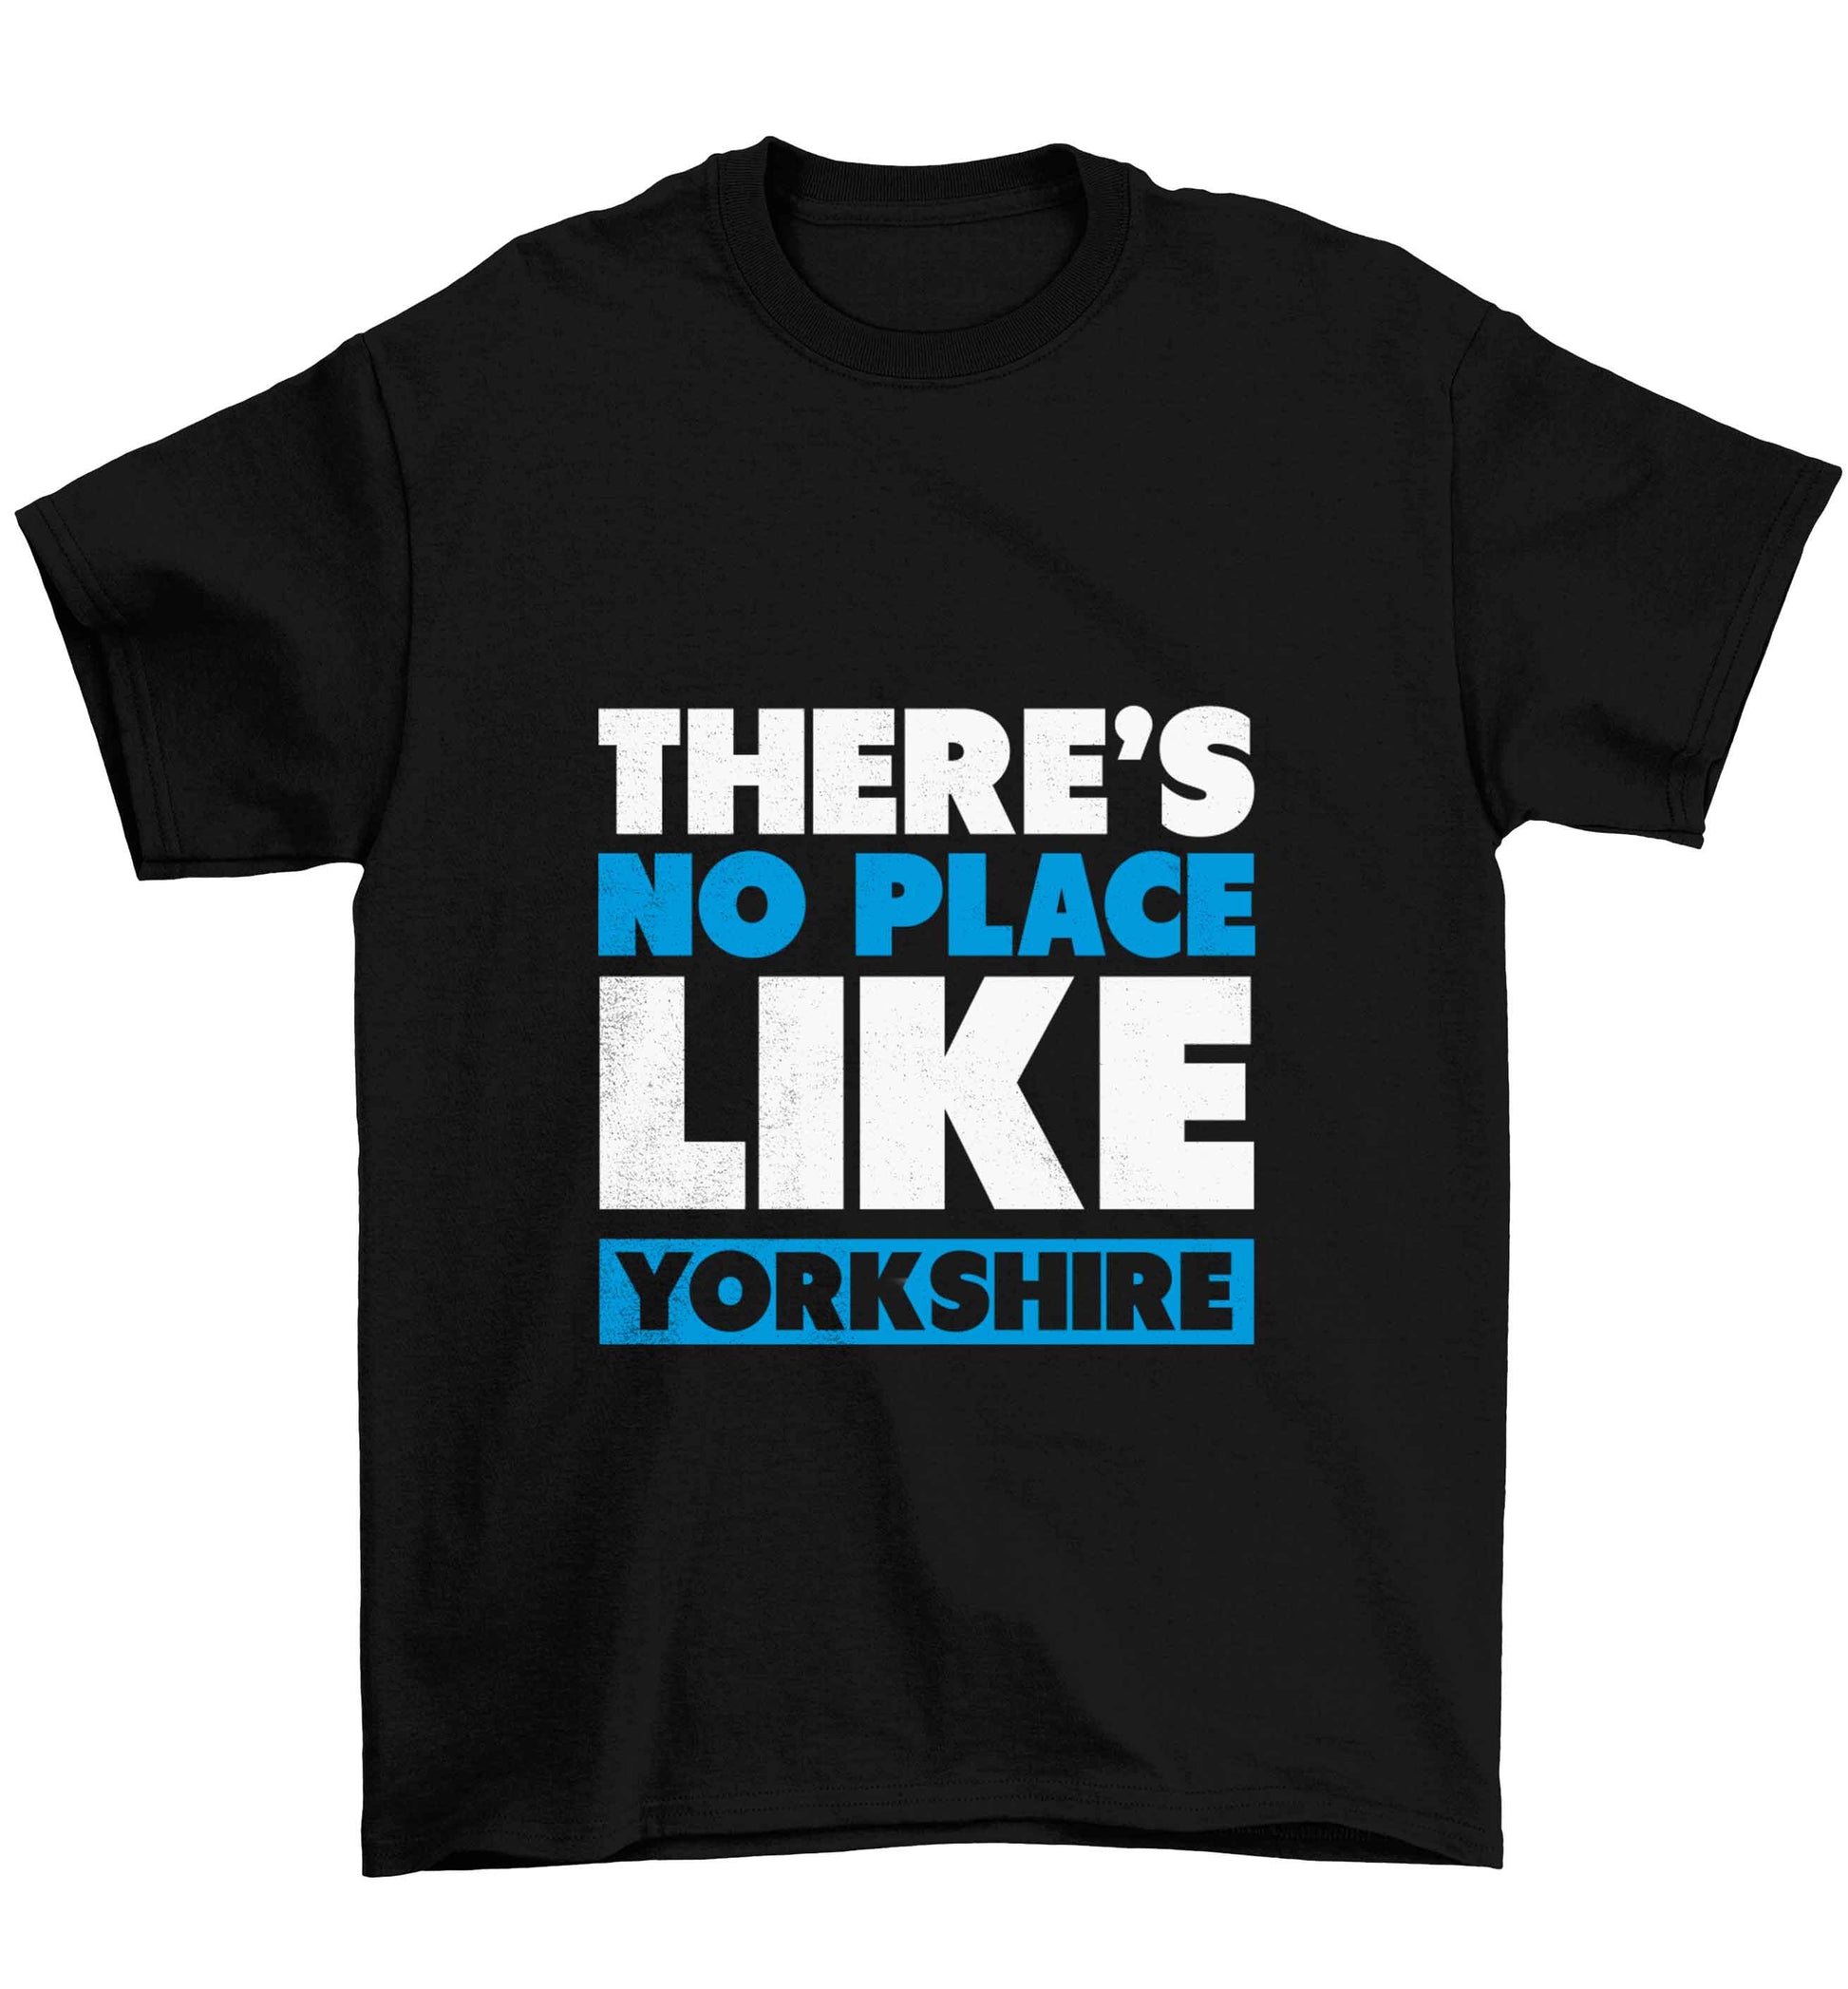 There's no place like Yorkshire Children's black Tshirt 12-13 Years